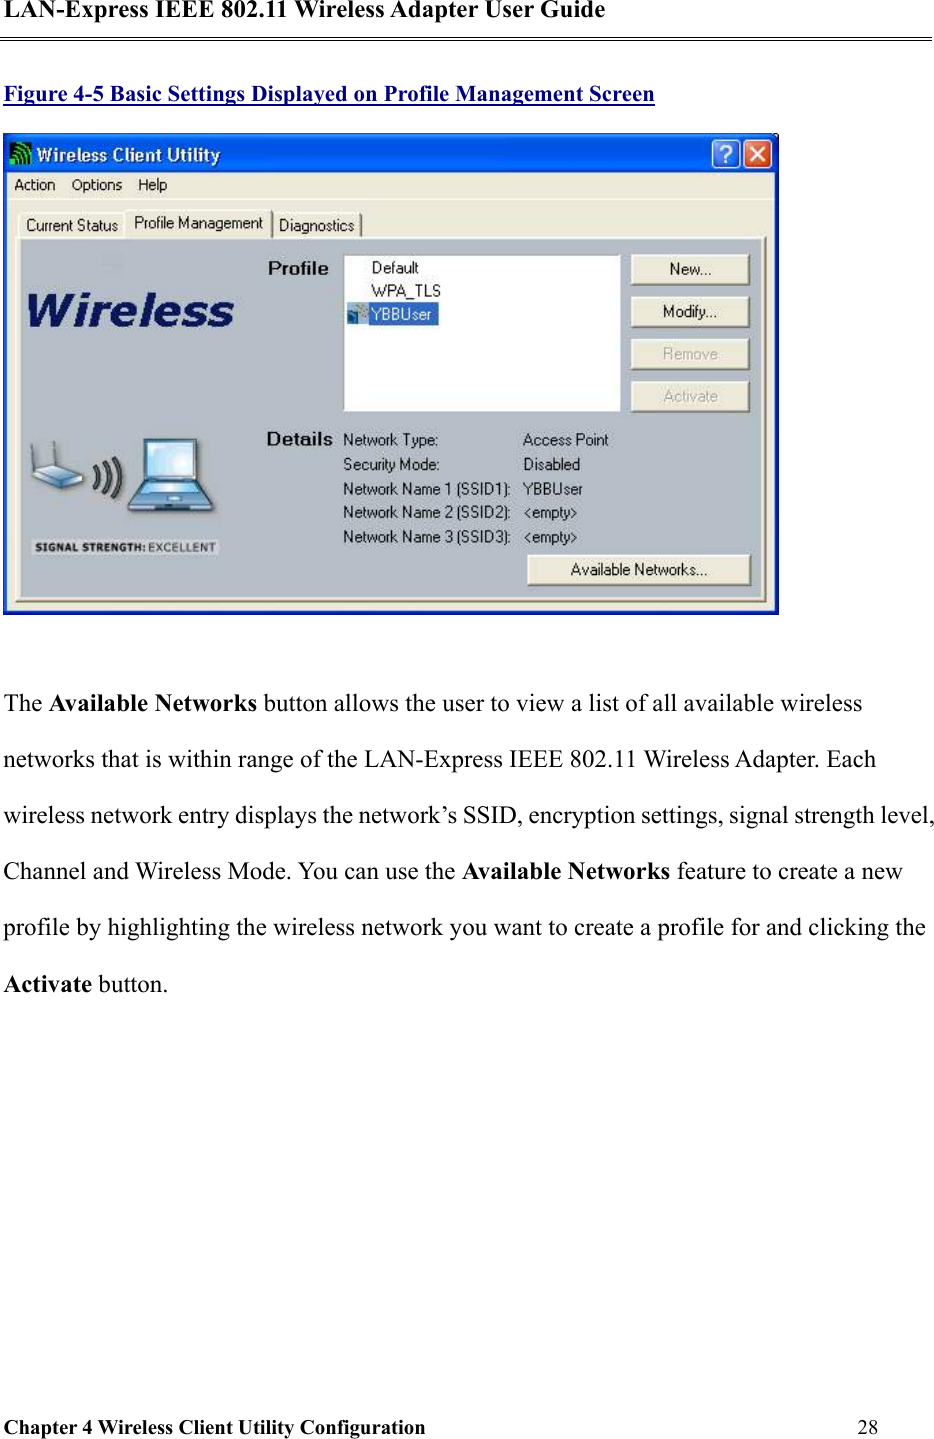 LAN-Express IEEE 802.11 Wireless Adapter User Guide Chapter 4 Wireless Client Utility Configuration   28  Figure 4-5 Basic Settings Displayed on Profile Management Screen   The Available Networks button allows the user to view a list of all available wireless networks that is within range of the LAN-Express IEEE 802.11 Wireless Adapter. Each wireless network entry displays the network’s SSID, encryption settings, signal strength level, Channel and Wireless Mode. You can use the Available Networks feature to create a new profile by highlighting the wireless network you want to create a profile for and clicking the Activate button. 